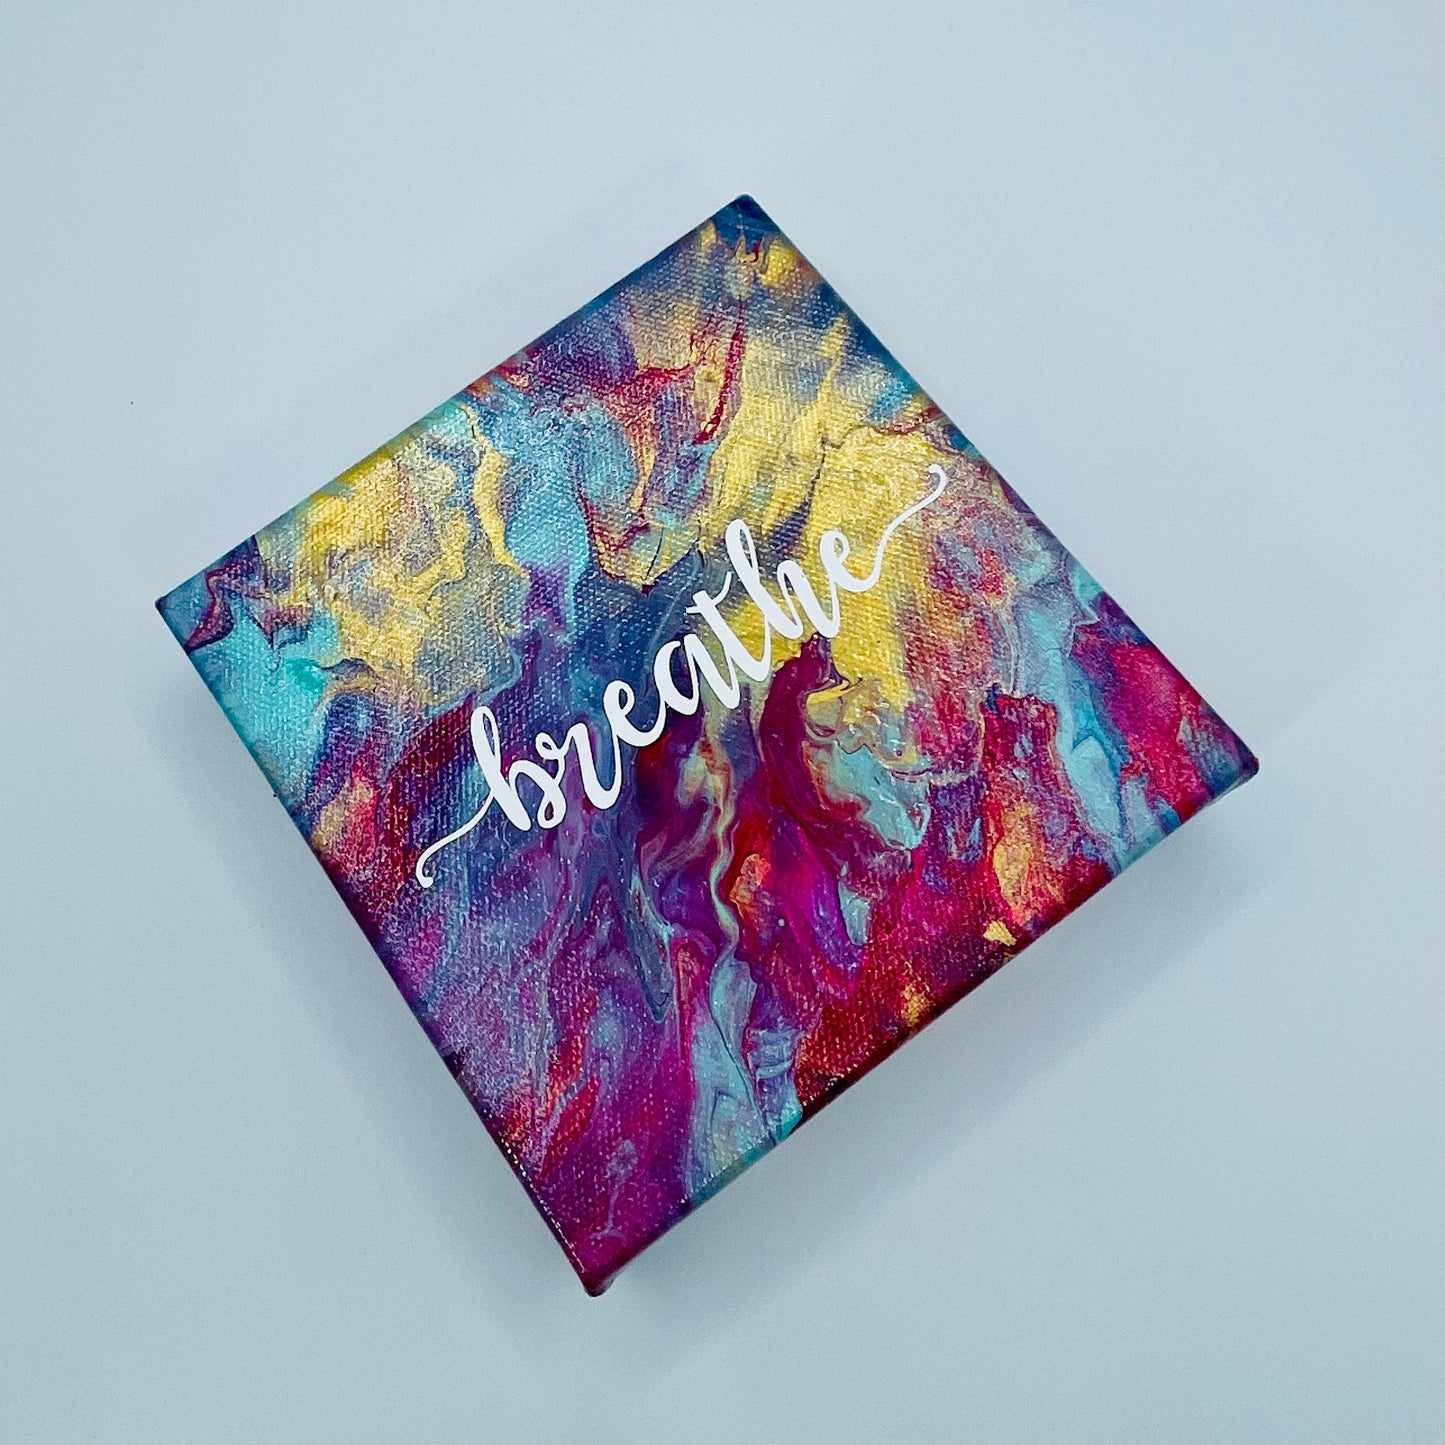 The Prana Breathe Block. A colorful hand painted painting that says 'breathe'